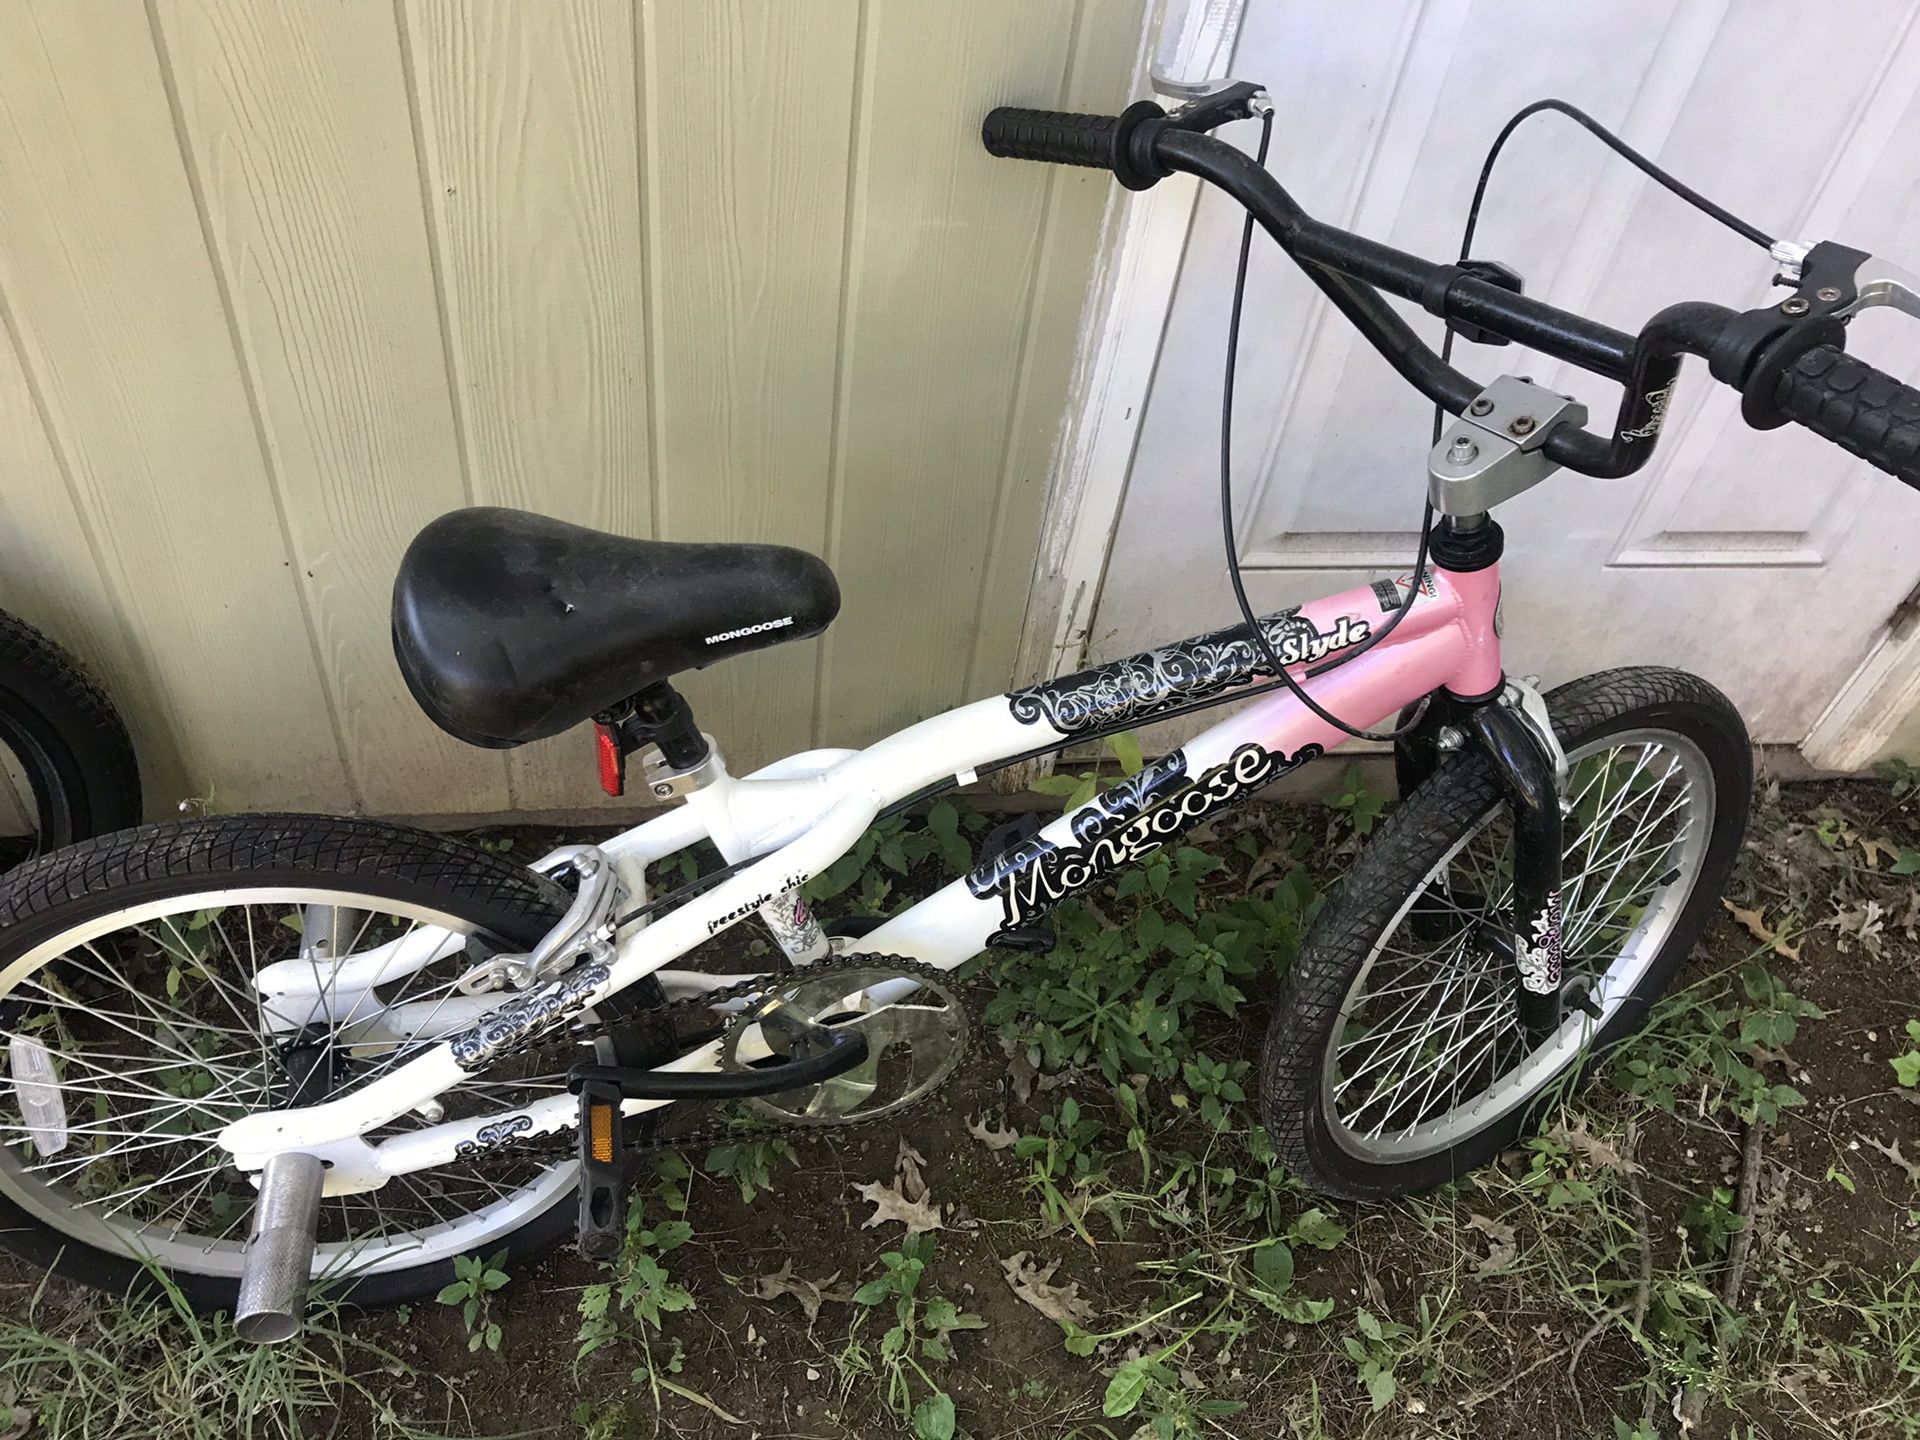 Mongoose Girl S Slyde Bmx Bicycle 20 Inch Mongoose Girl S Slyde Bmx Bicycle 20 Inch